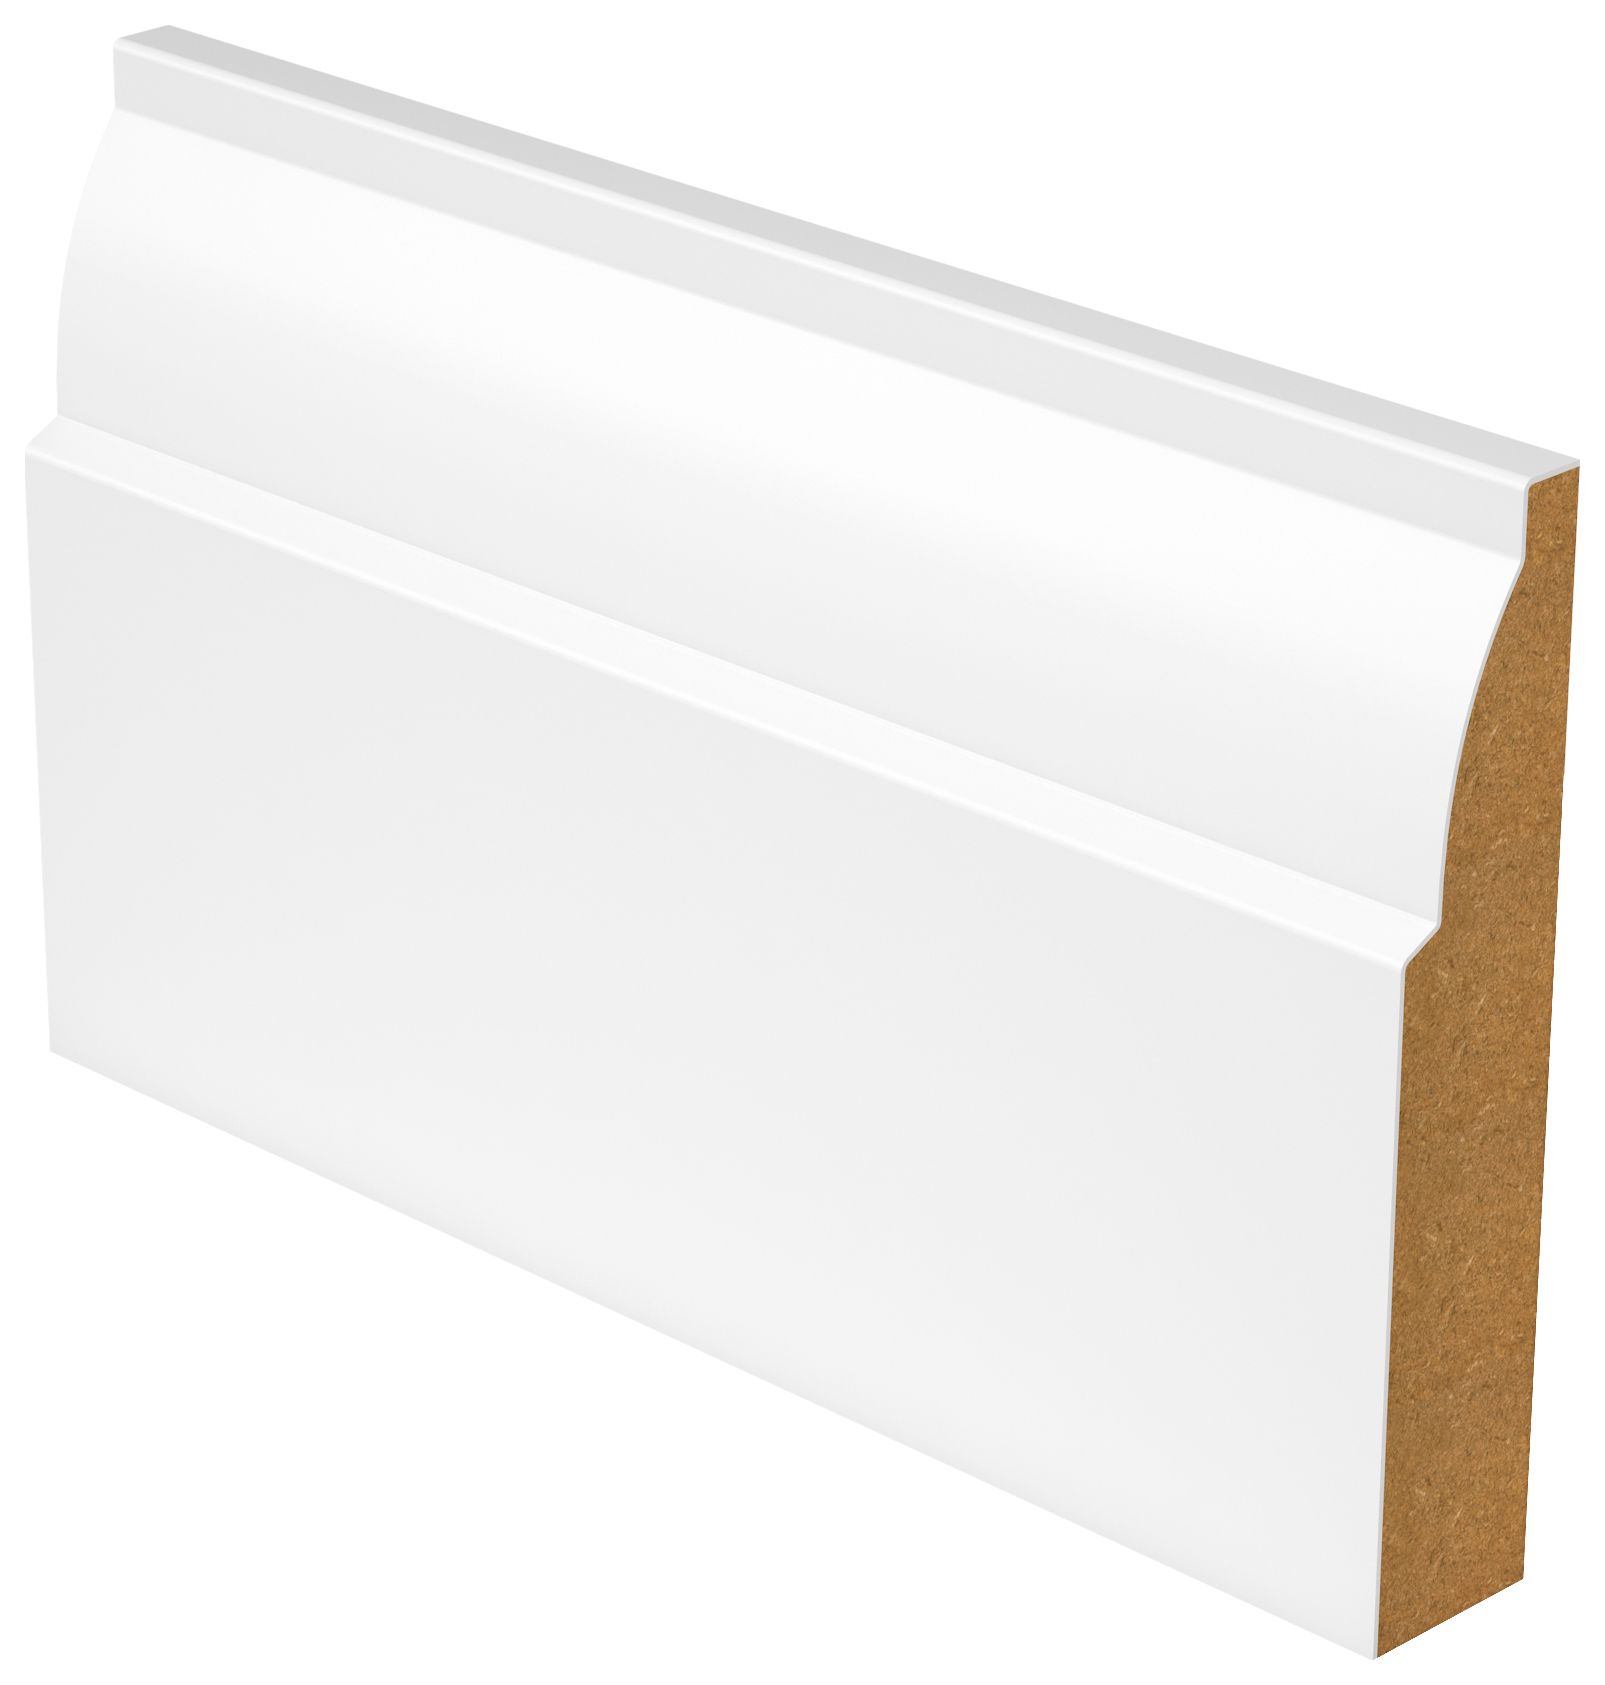 Image of Wickes Ovolo White MDF Skirting - 18 x 144 x 4200mm